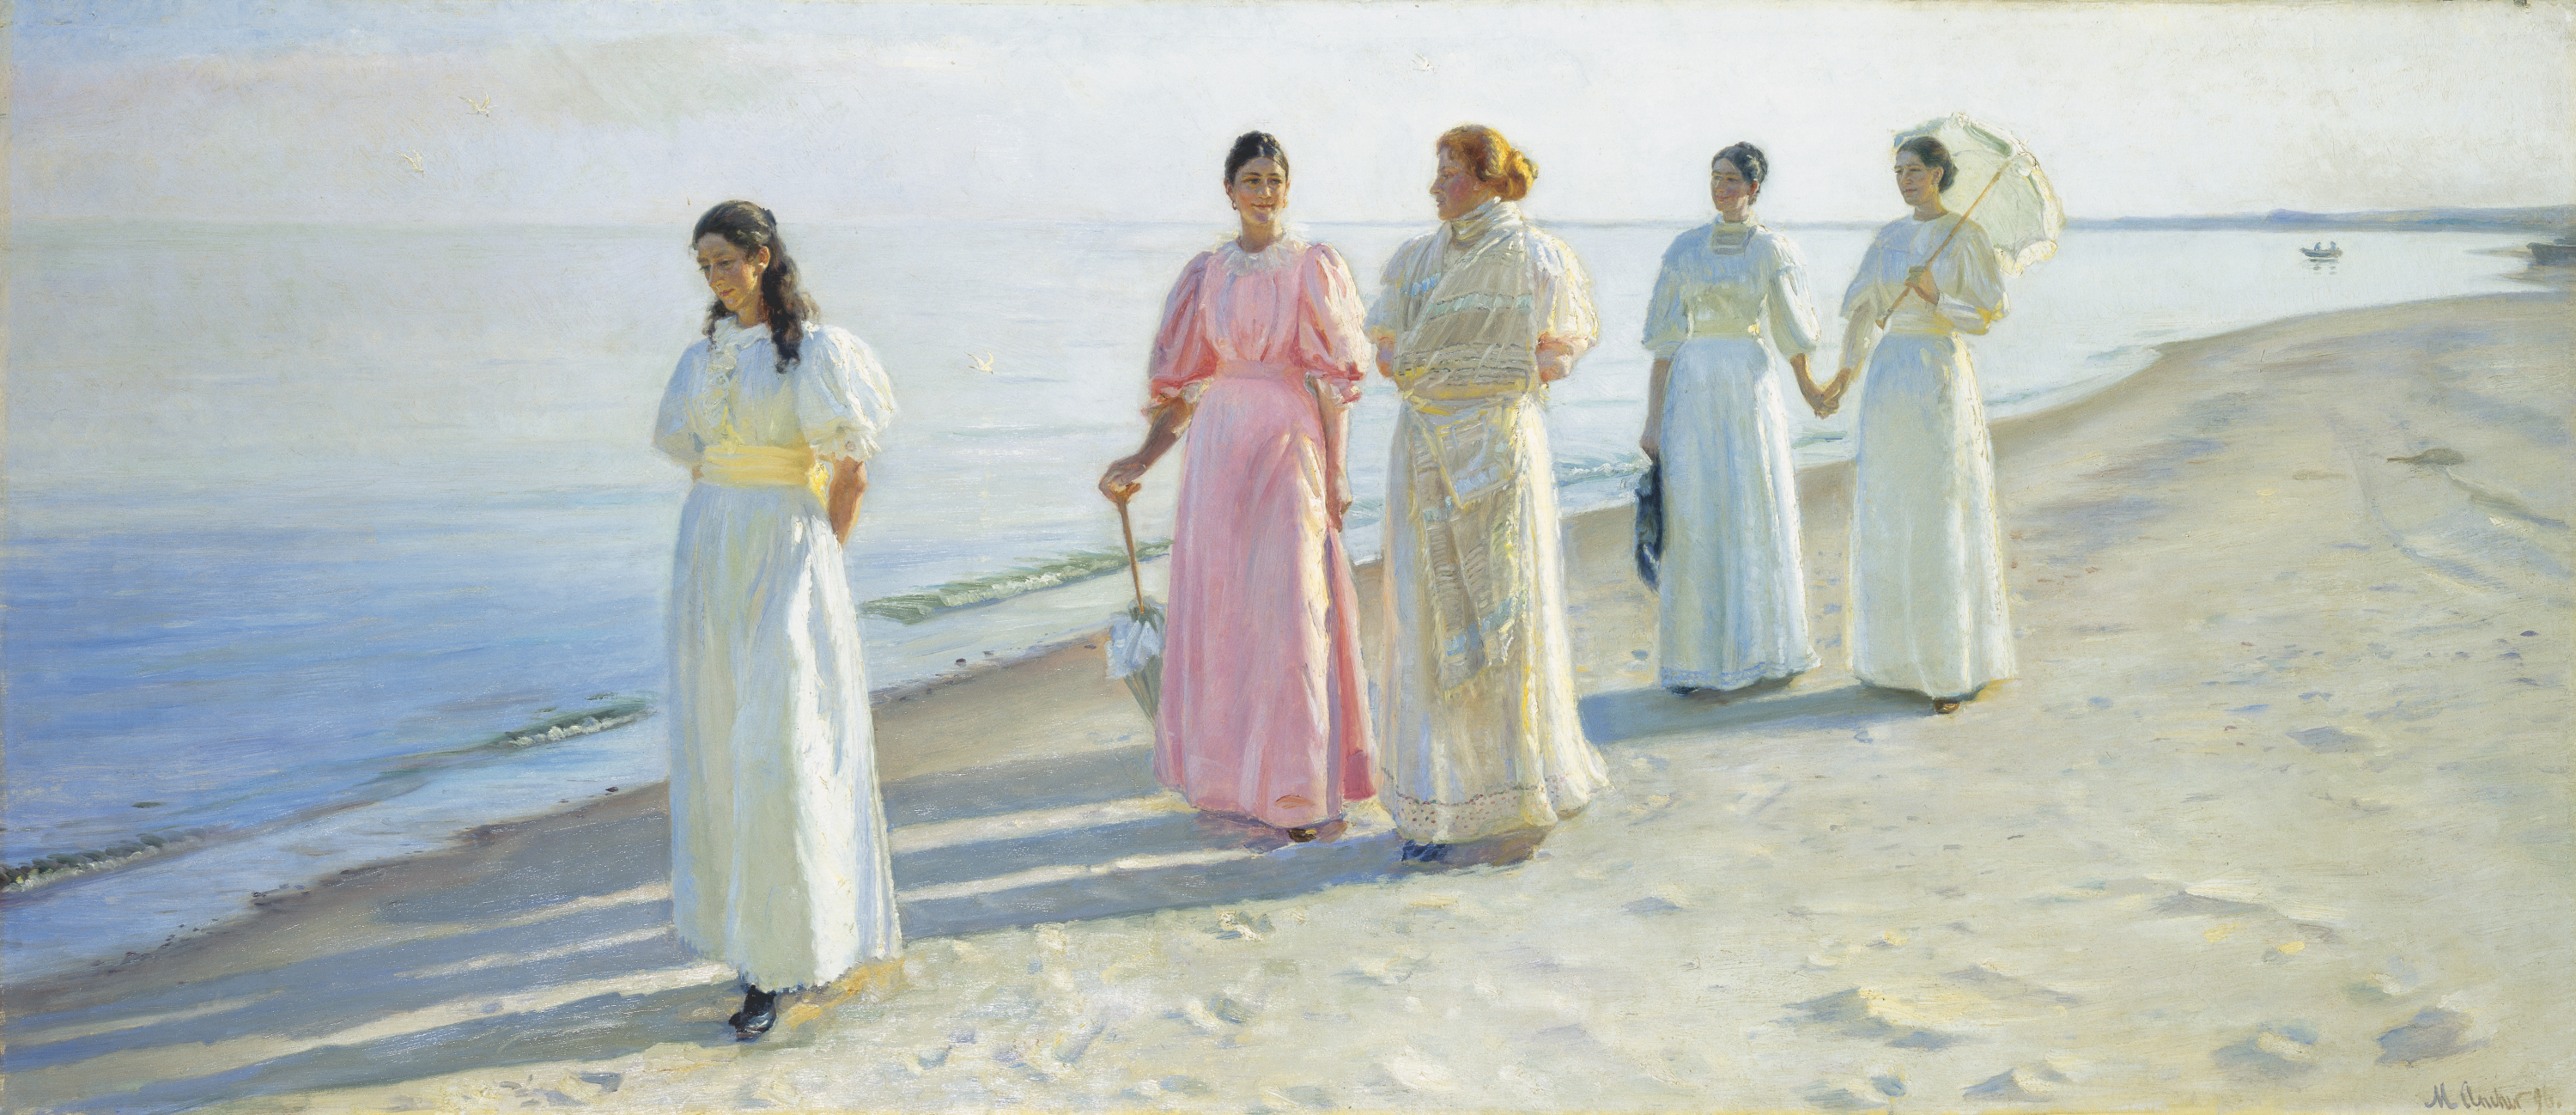 A Stroll on the Beach by Michael Ancher - 1896 - 69 x 161cm Skagens Kunstmuseer